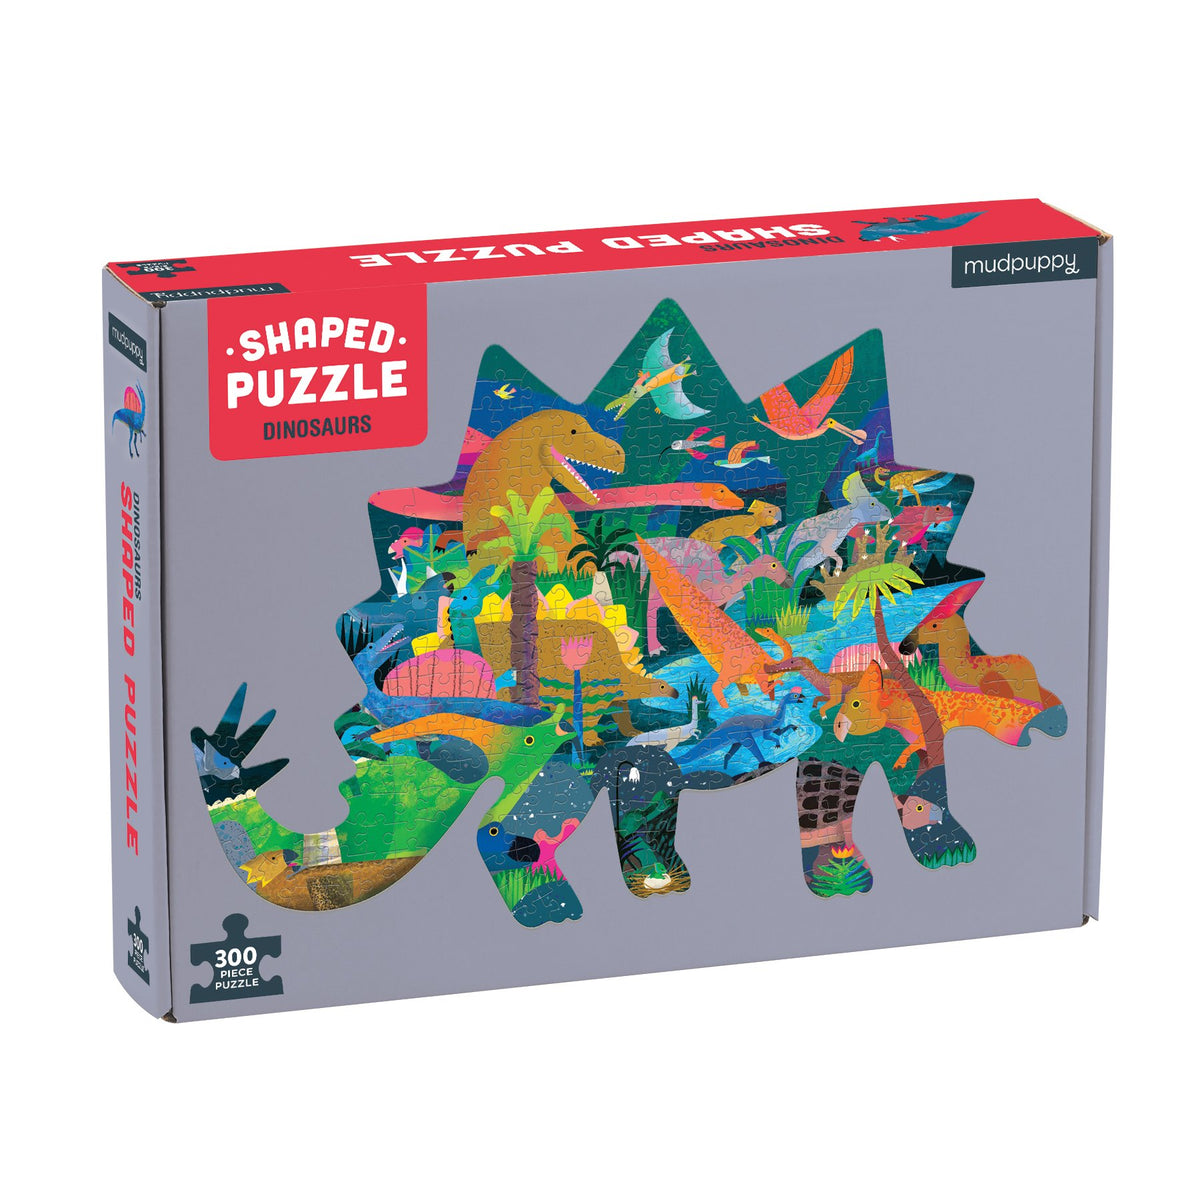 Shaped Scene Puzzle - 300 pc Cover